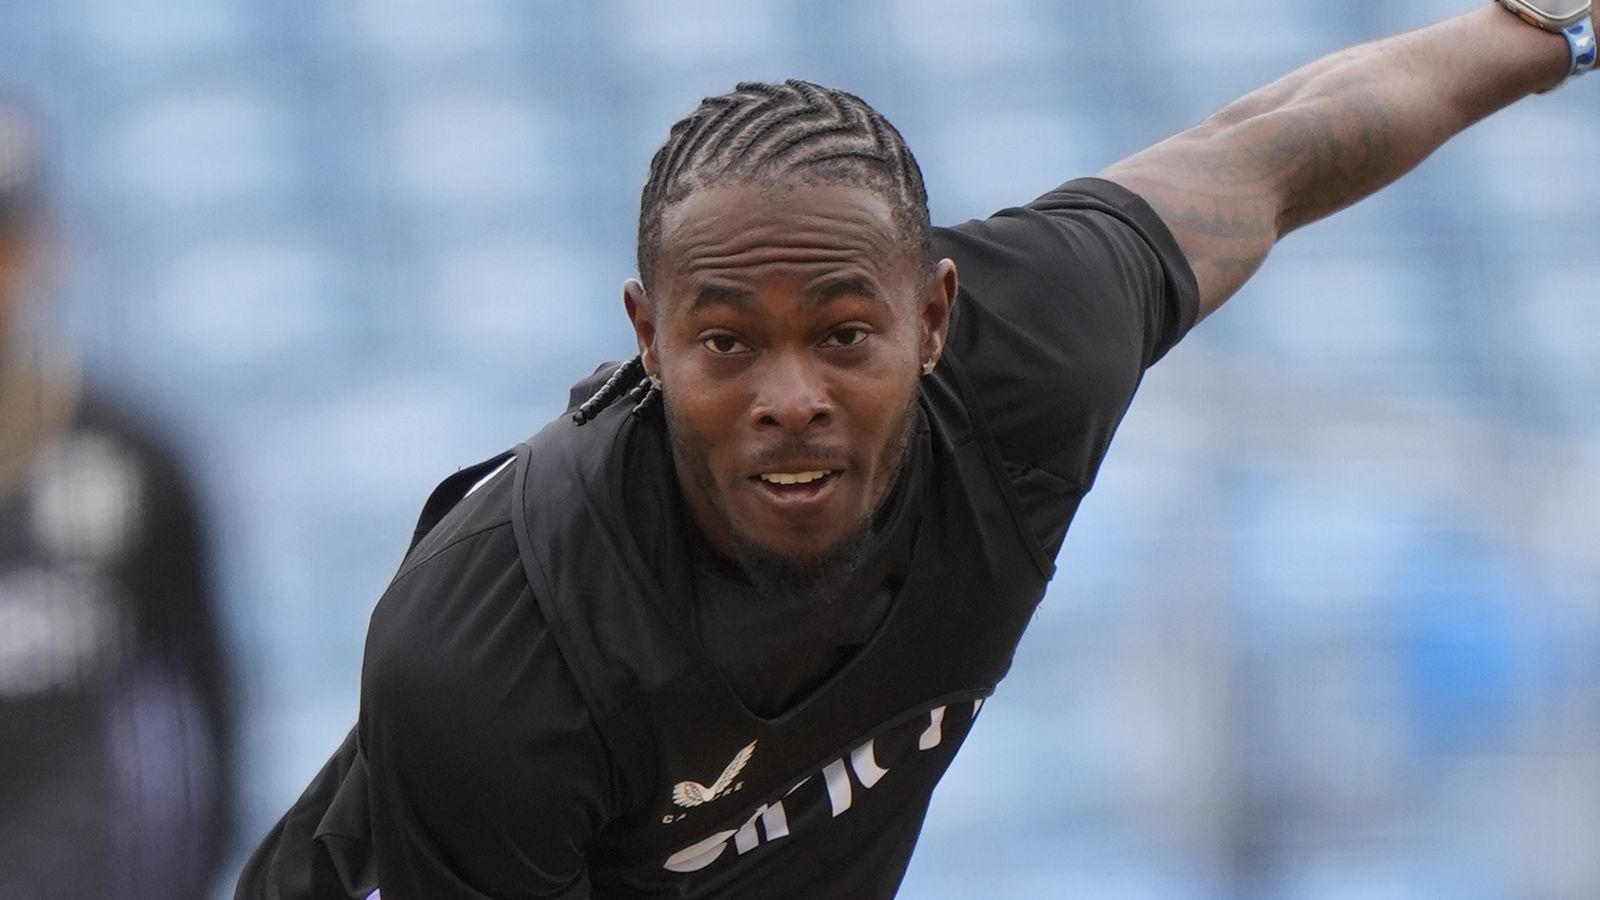 Jofra Archer to make England return against Pakistan in first T20 international on Wednesday